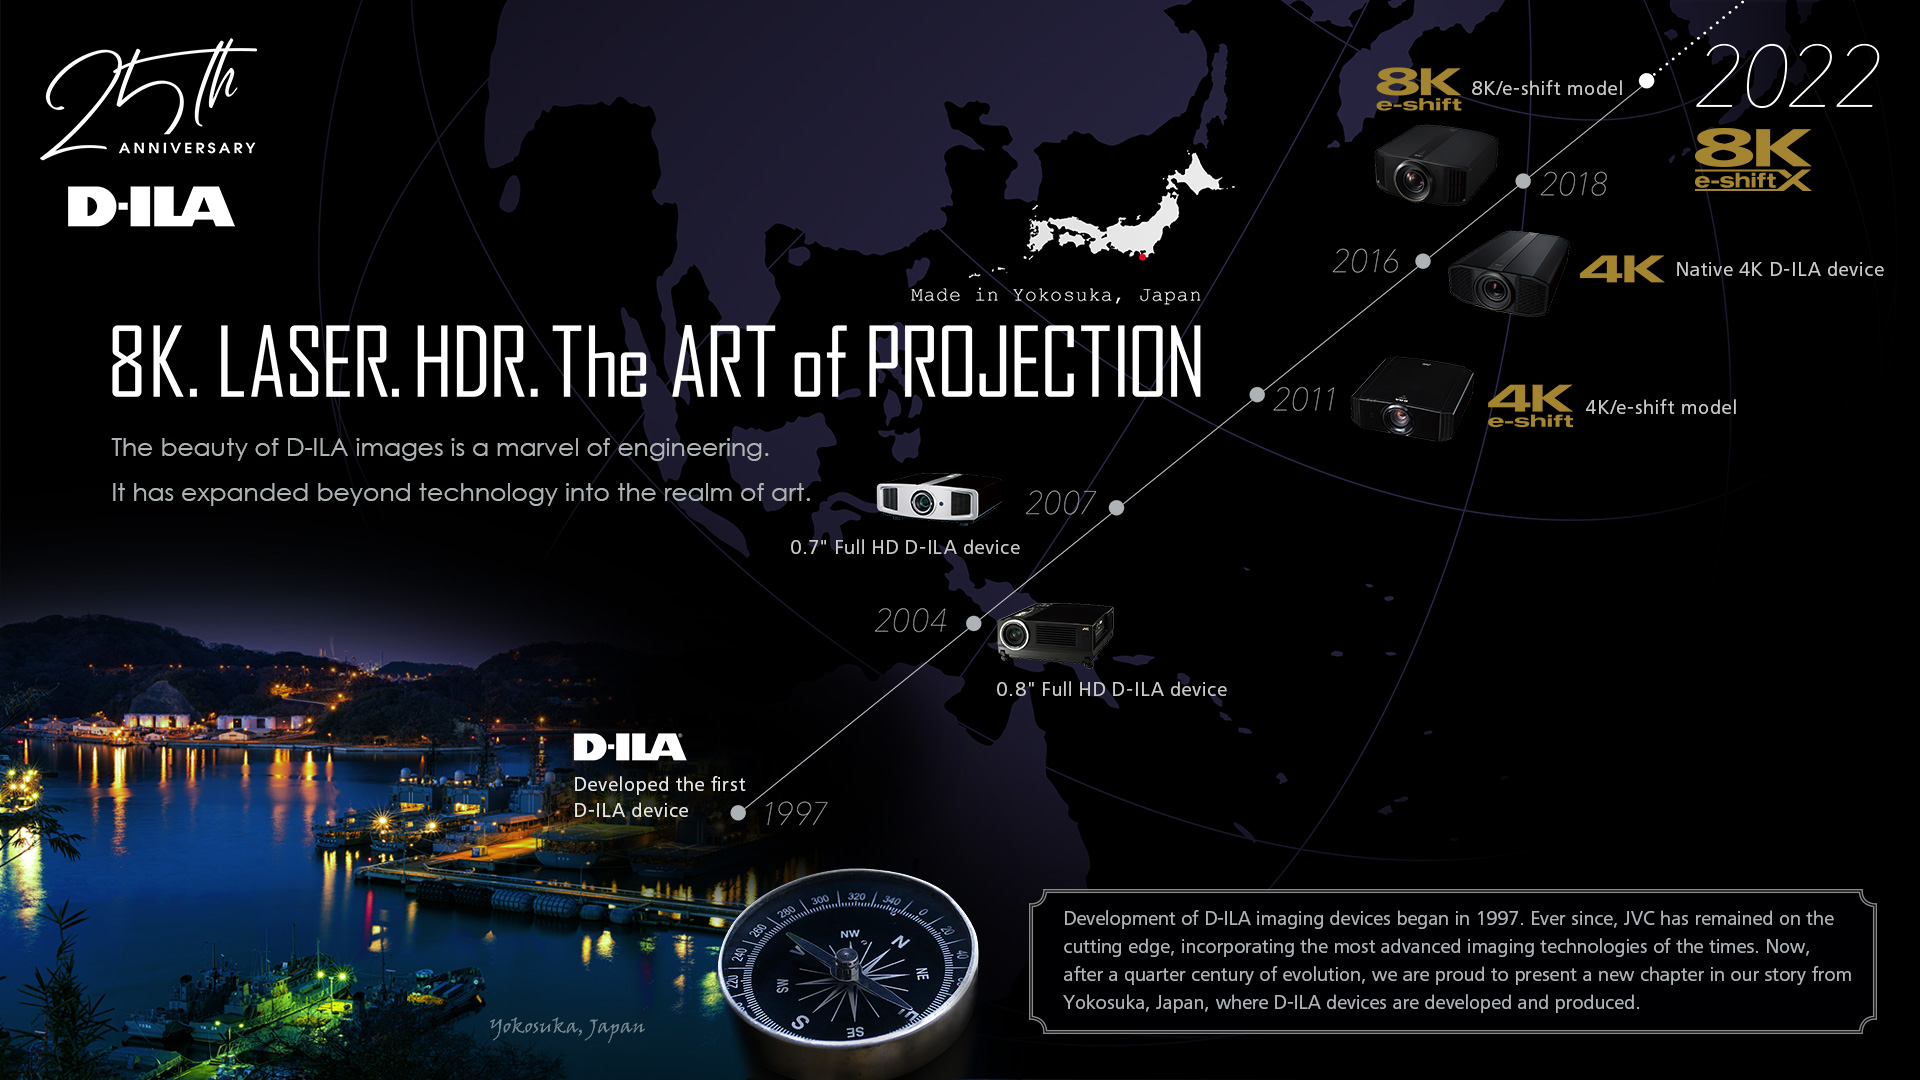 8K. LASER. HDR. The ART OF PROJECTION